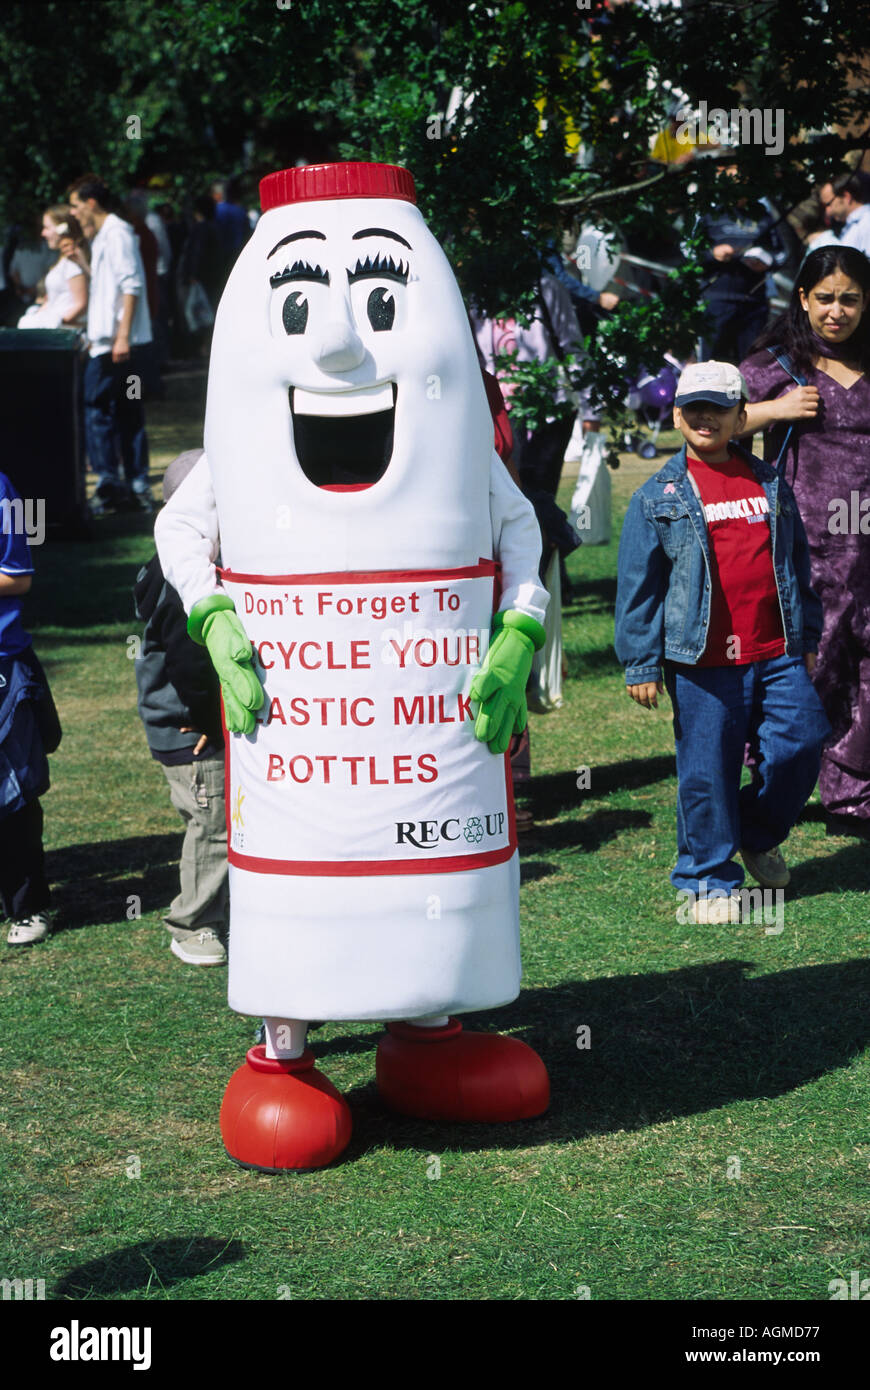 Human Dressed as Milk Bottle at Festival Recycling Theme Stock Photo - Alamy